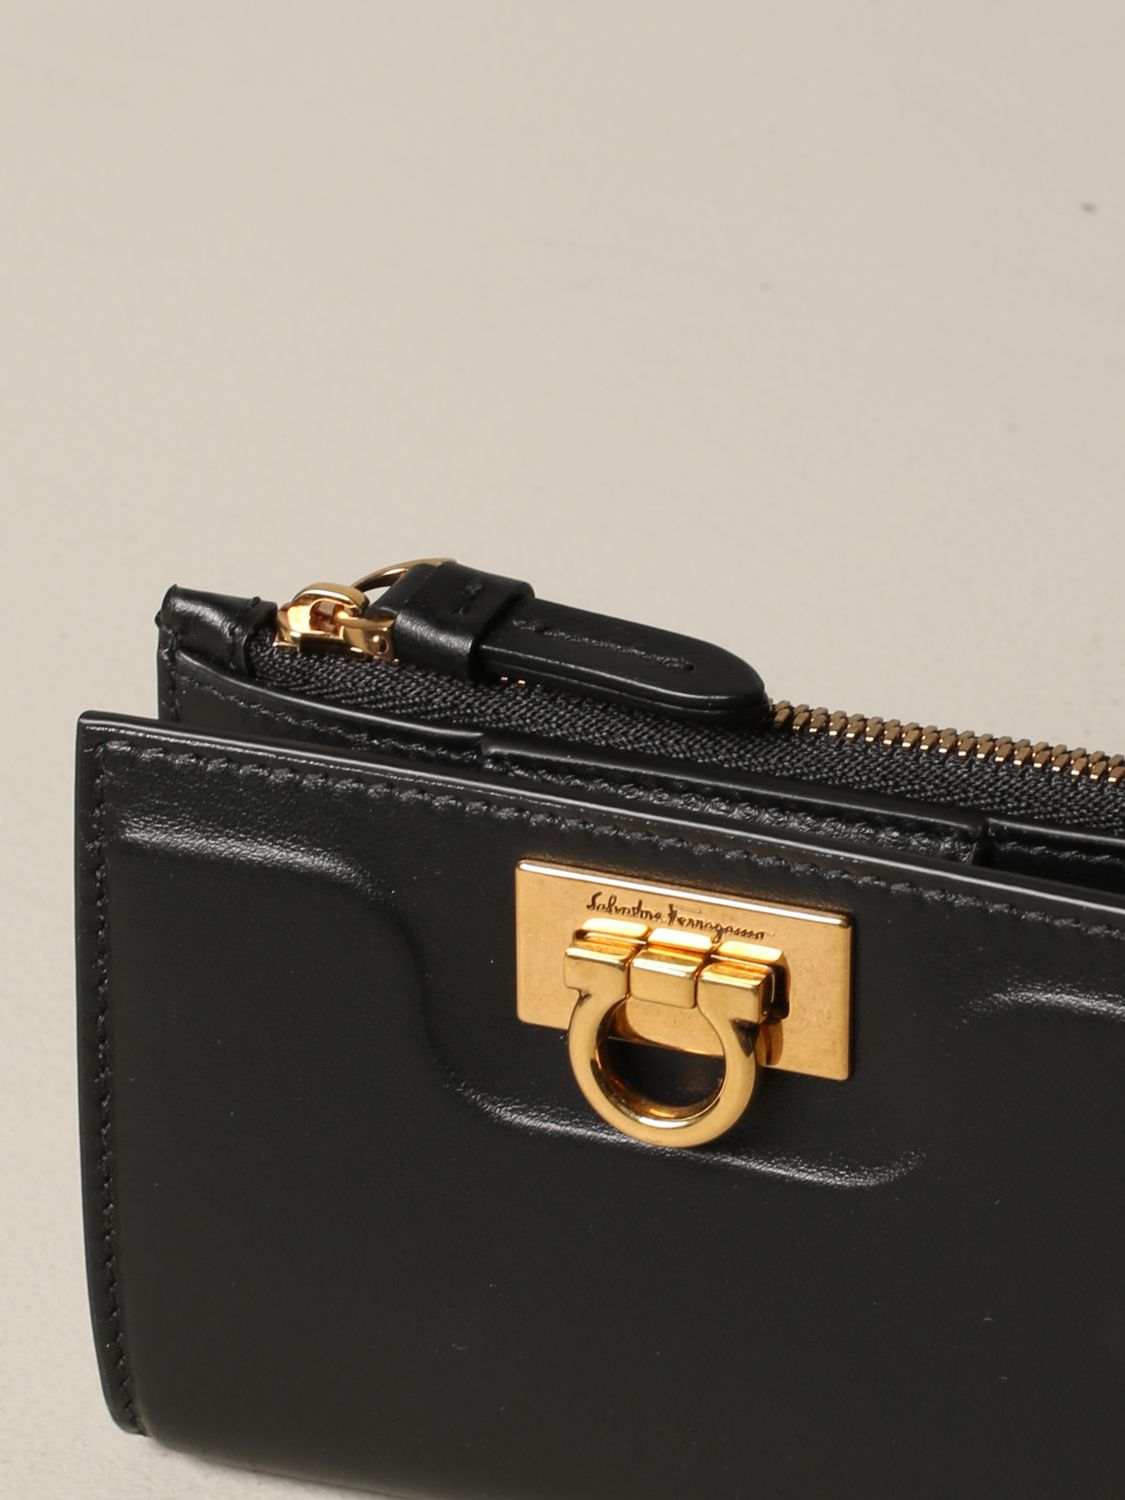 Salvatore Ferragamo Outlet: Square leather wallet with chain - Black ...